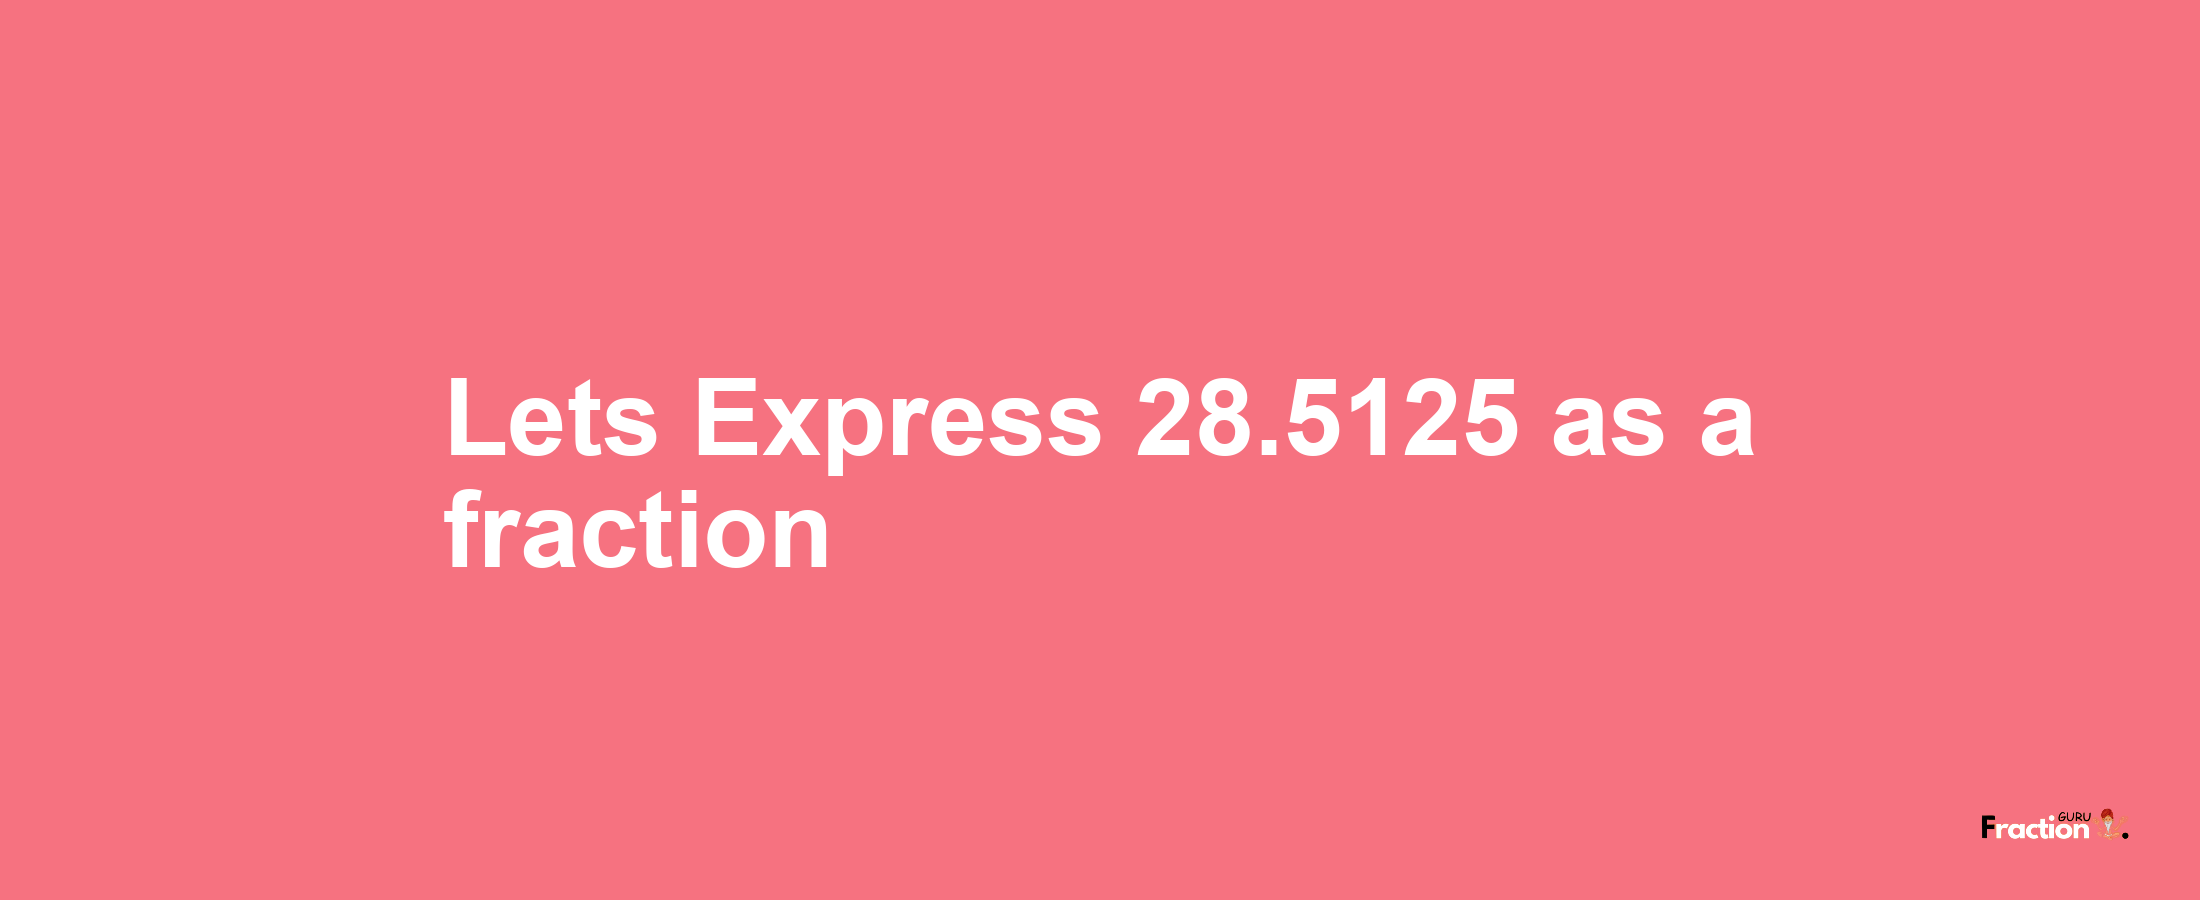 Lets Express 28.5125 as afraction